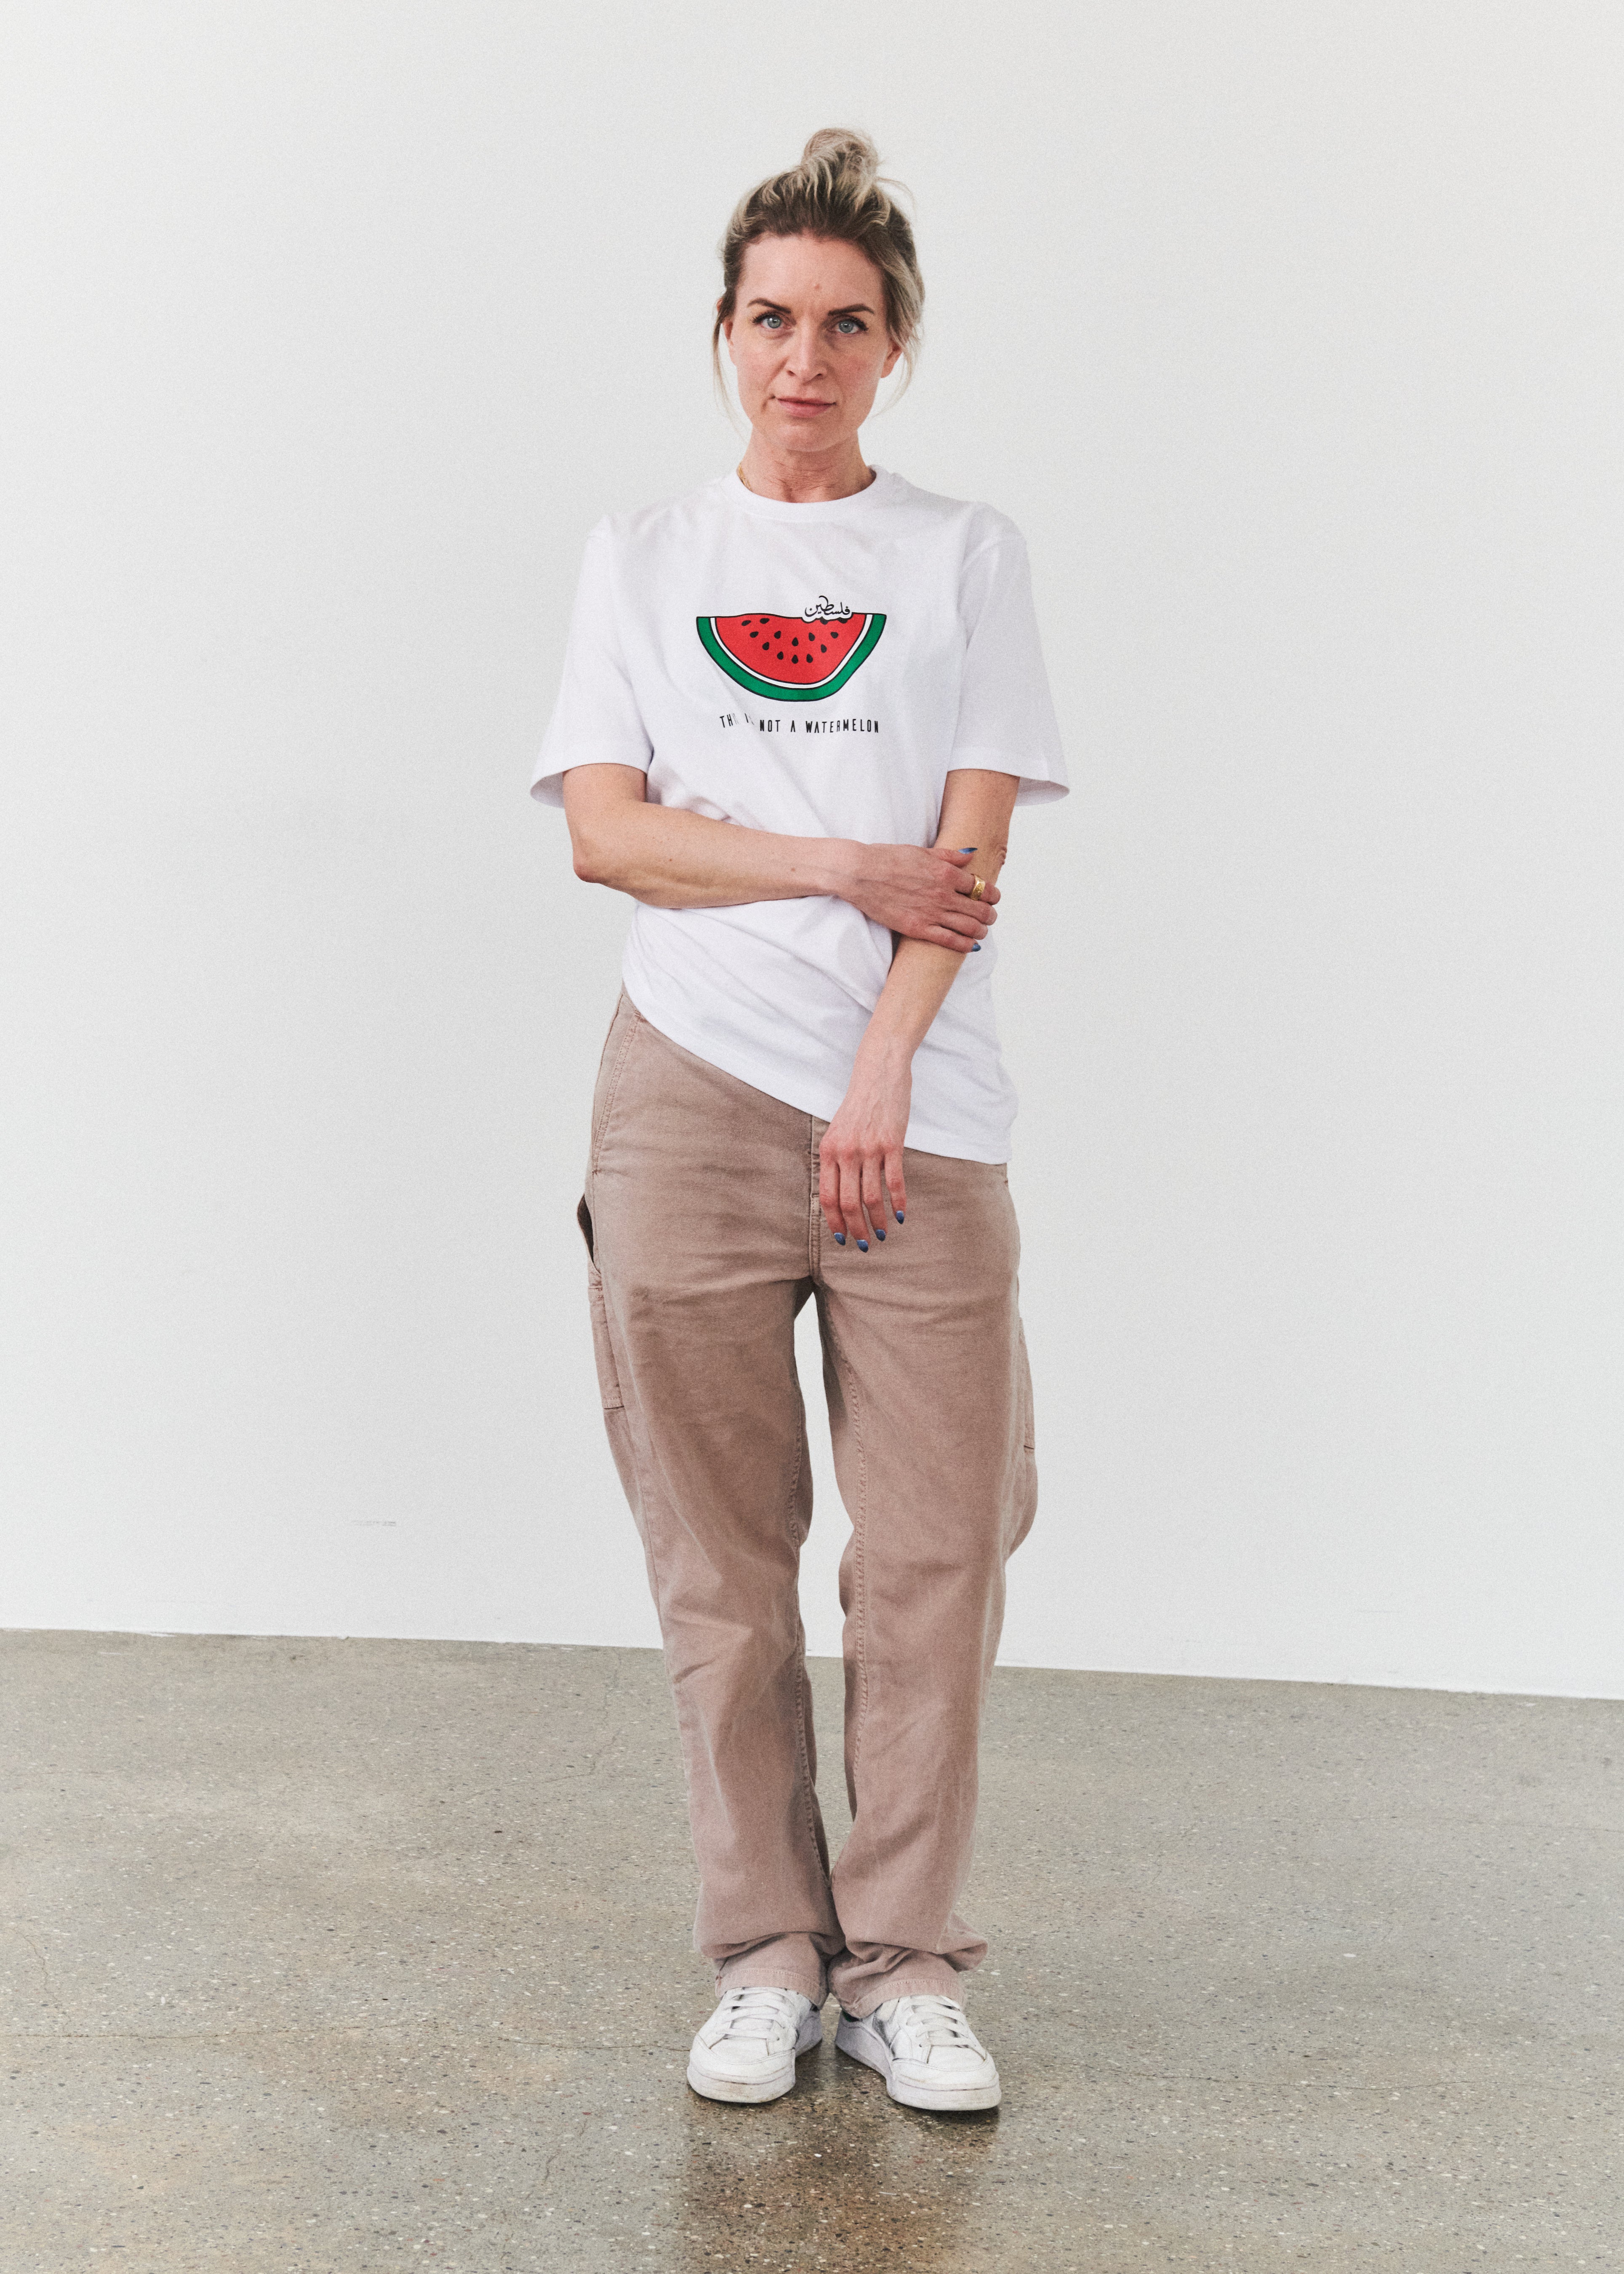 This is not a watermelon T-shirt